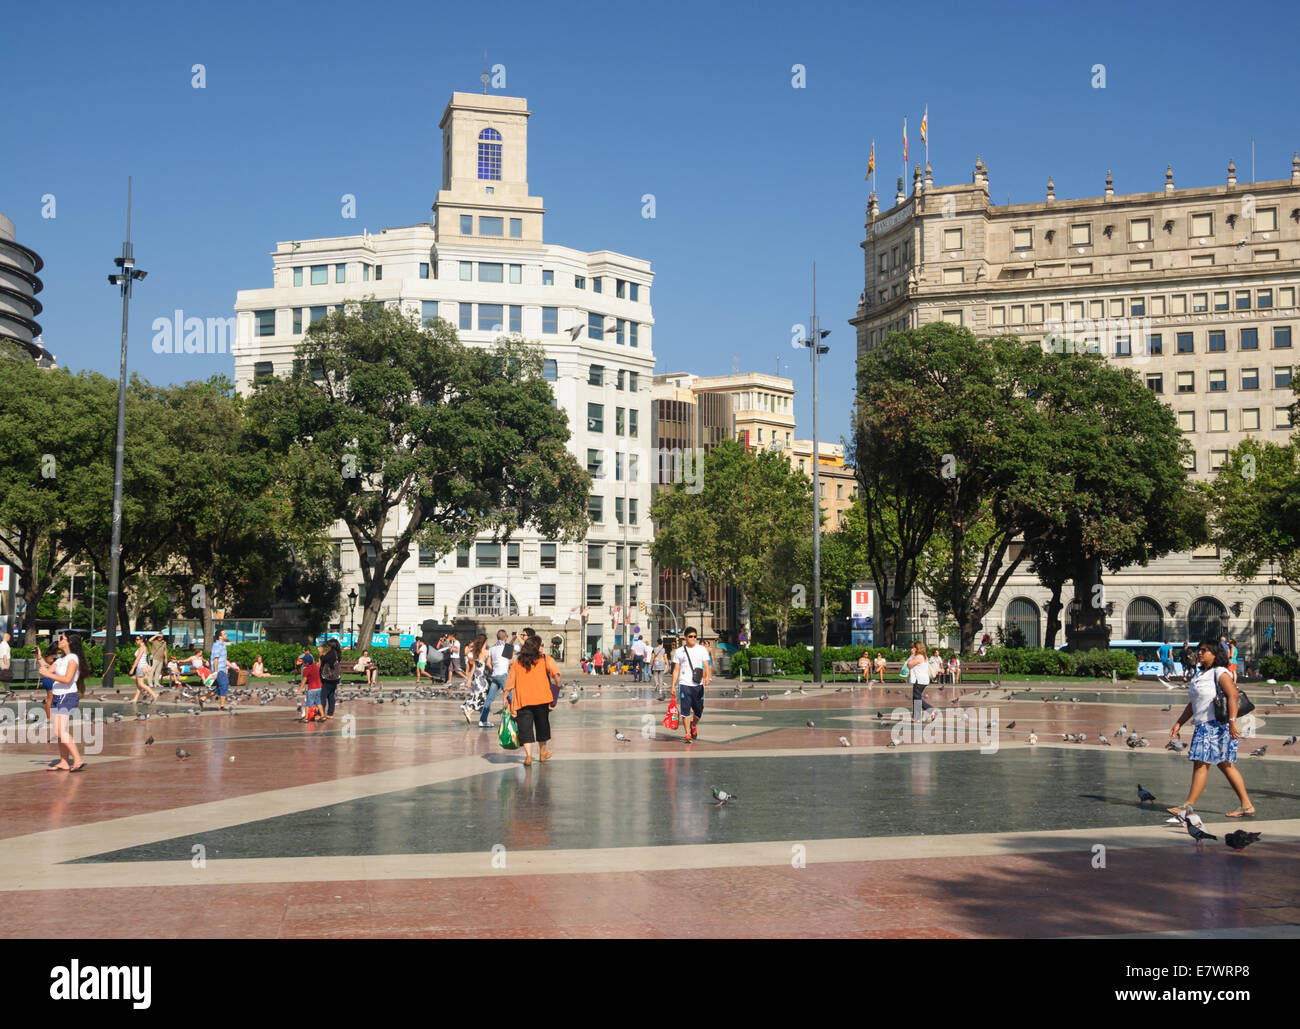 Placa Catalunya open space with doves and people. Barcelona, Spain on July 31, 2012. Stock Photo